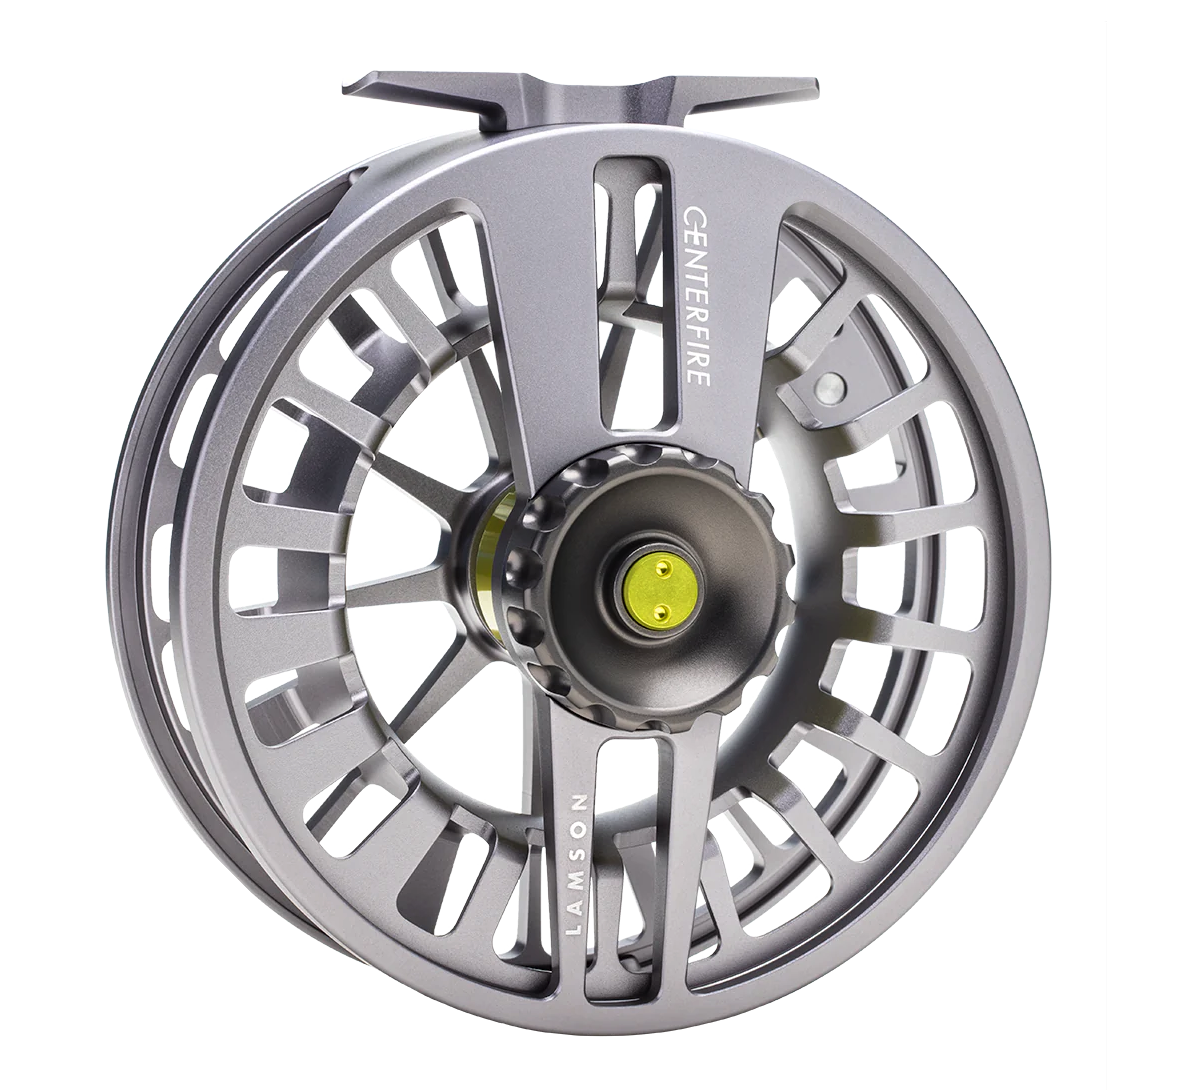 Shop Our Best Selection of Saltwater Fly Reels